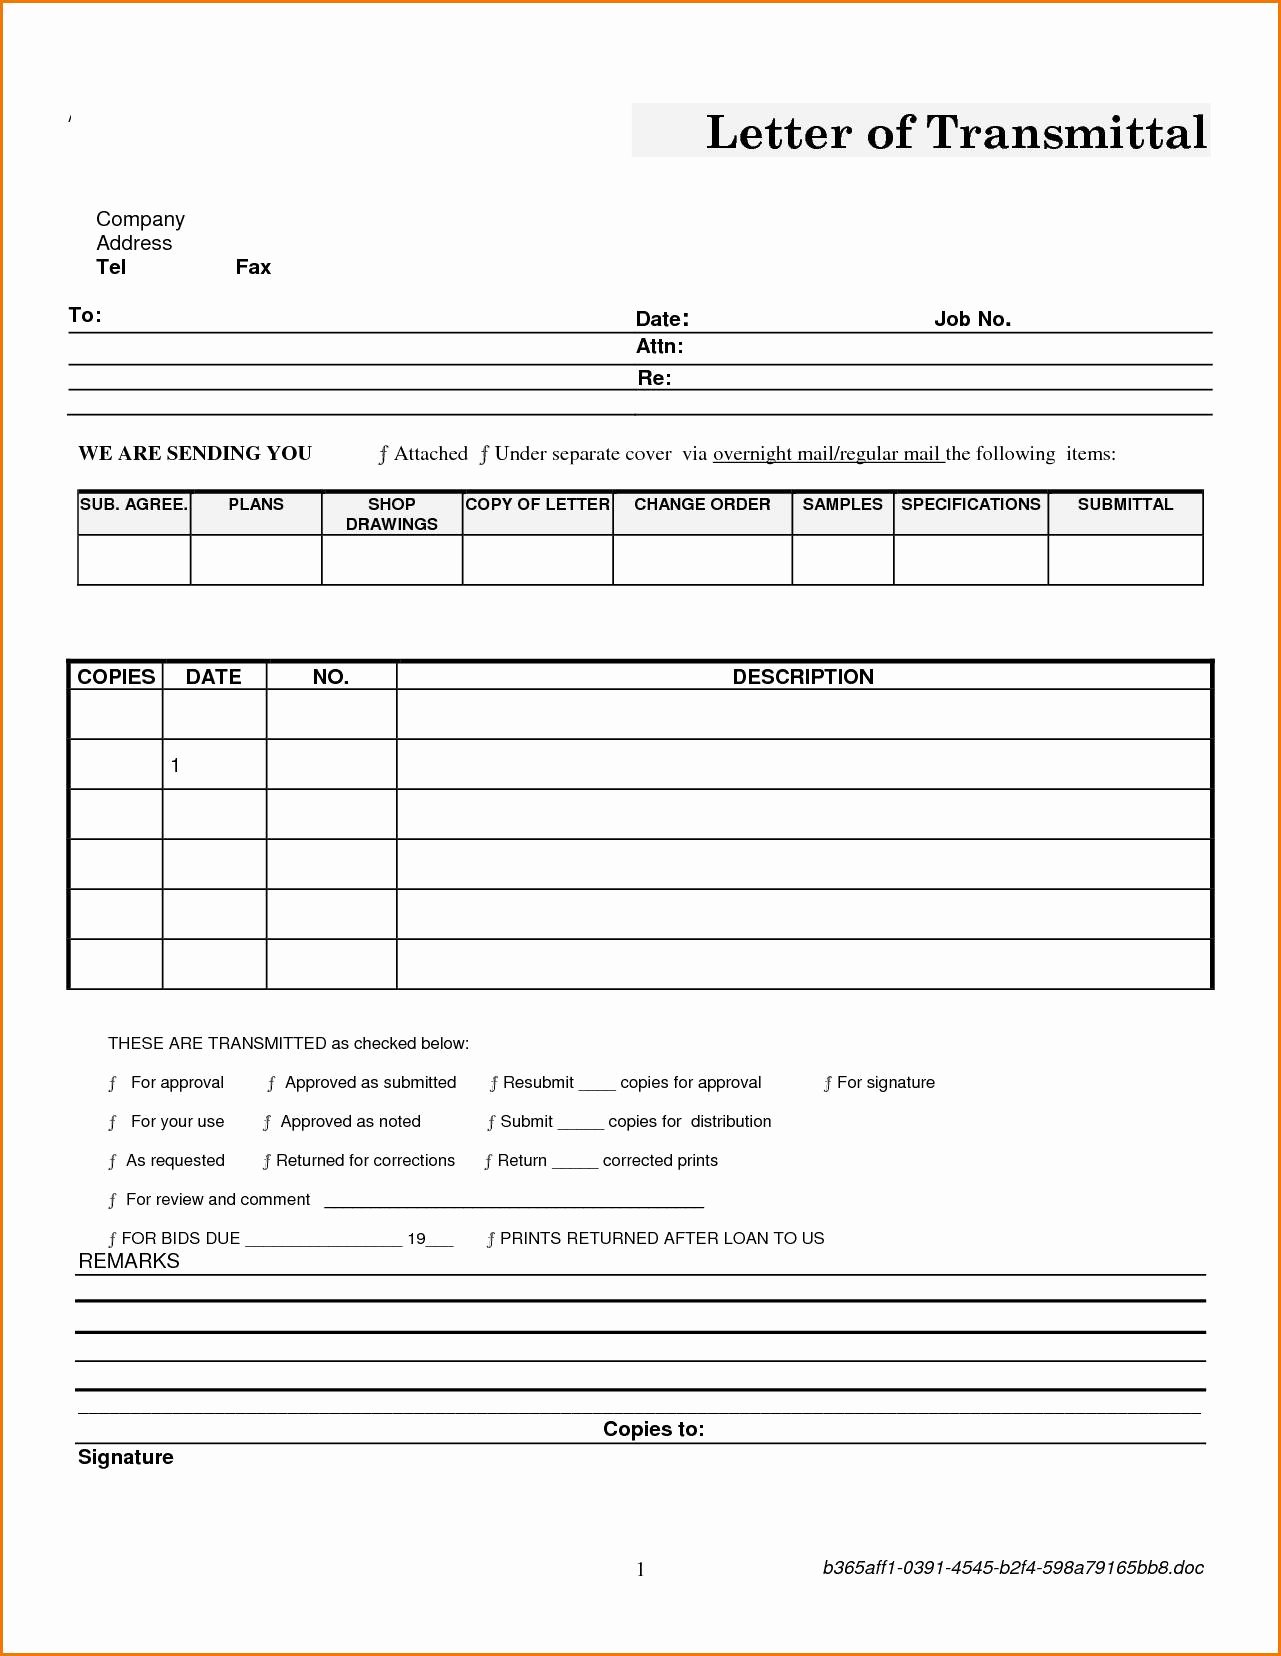 Transmittal form Templates Awesome Free Construction Letter Transmittal Template Samples